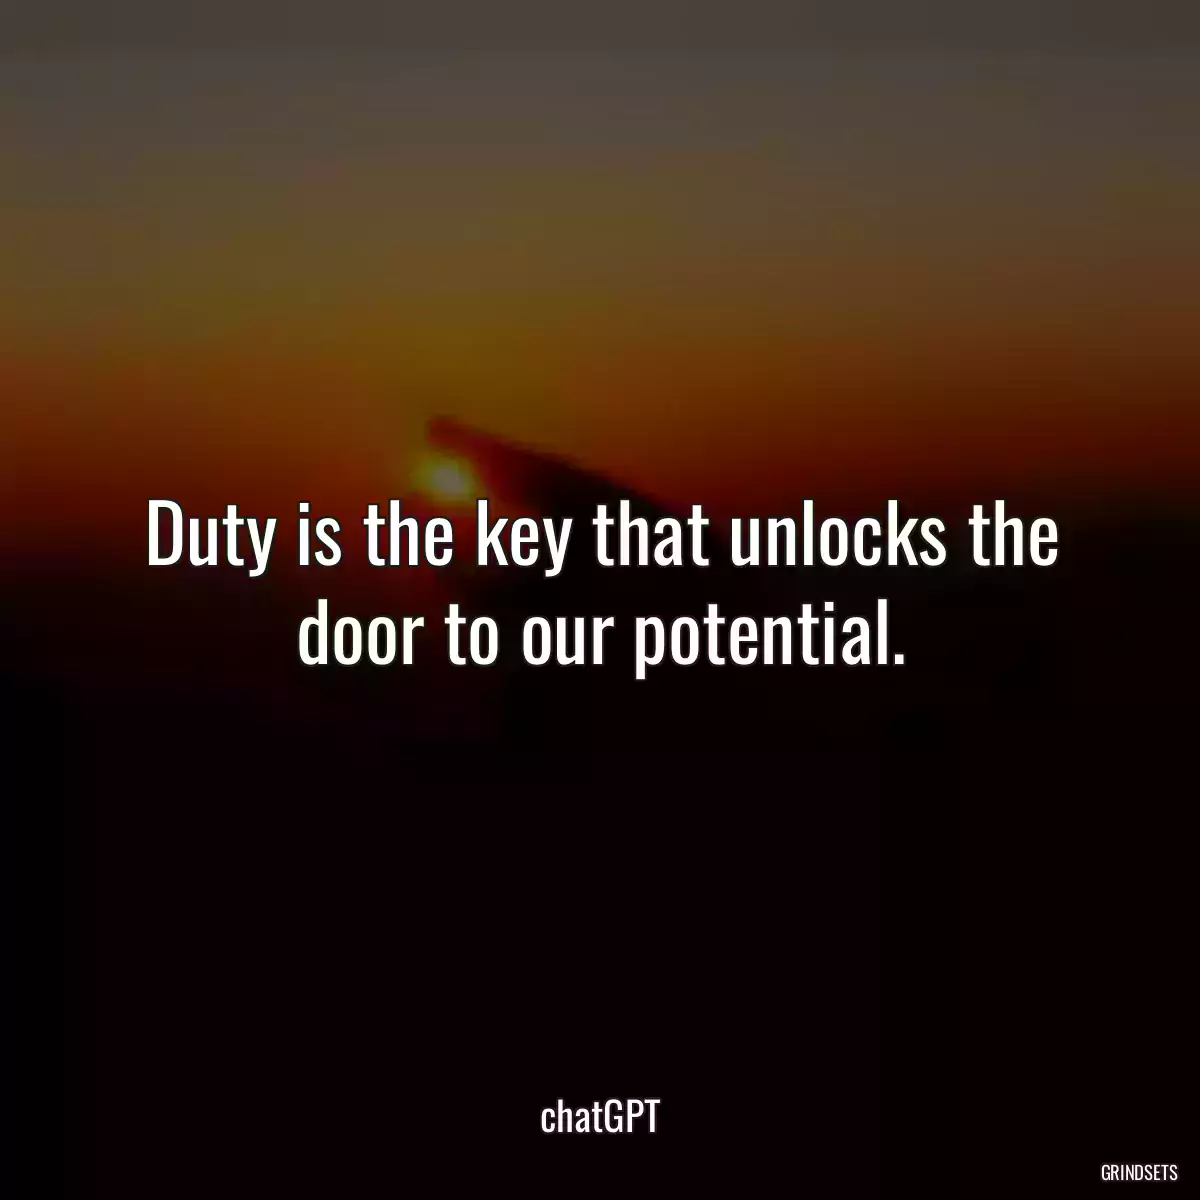 Duty is the key that unlocks the door to our potential.